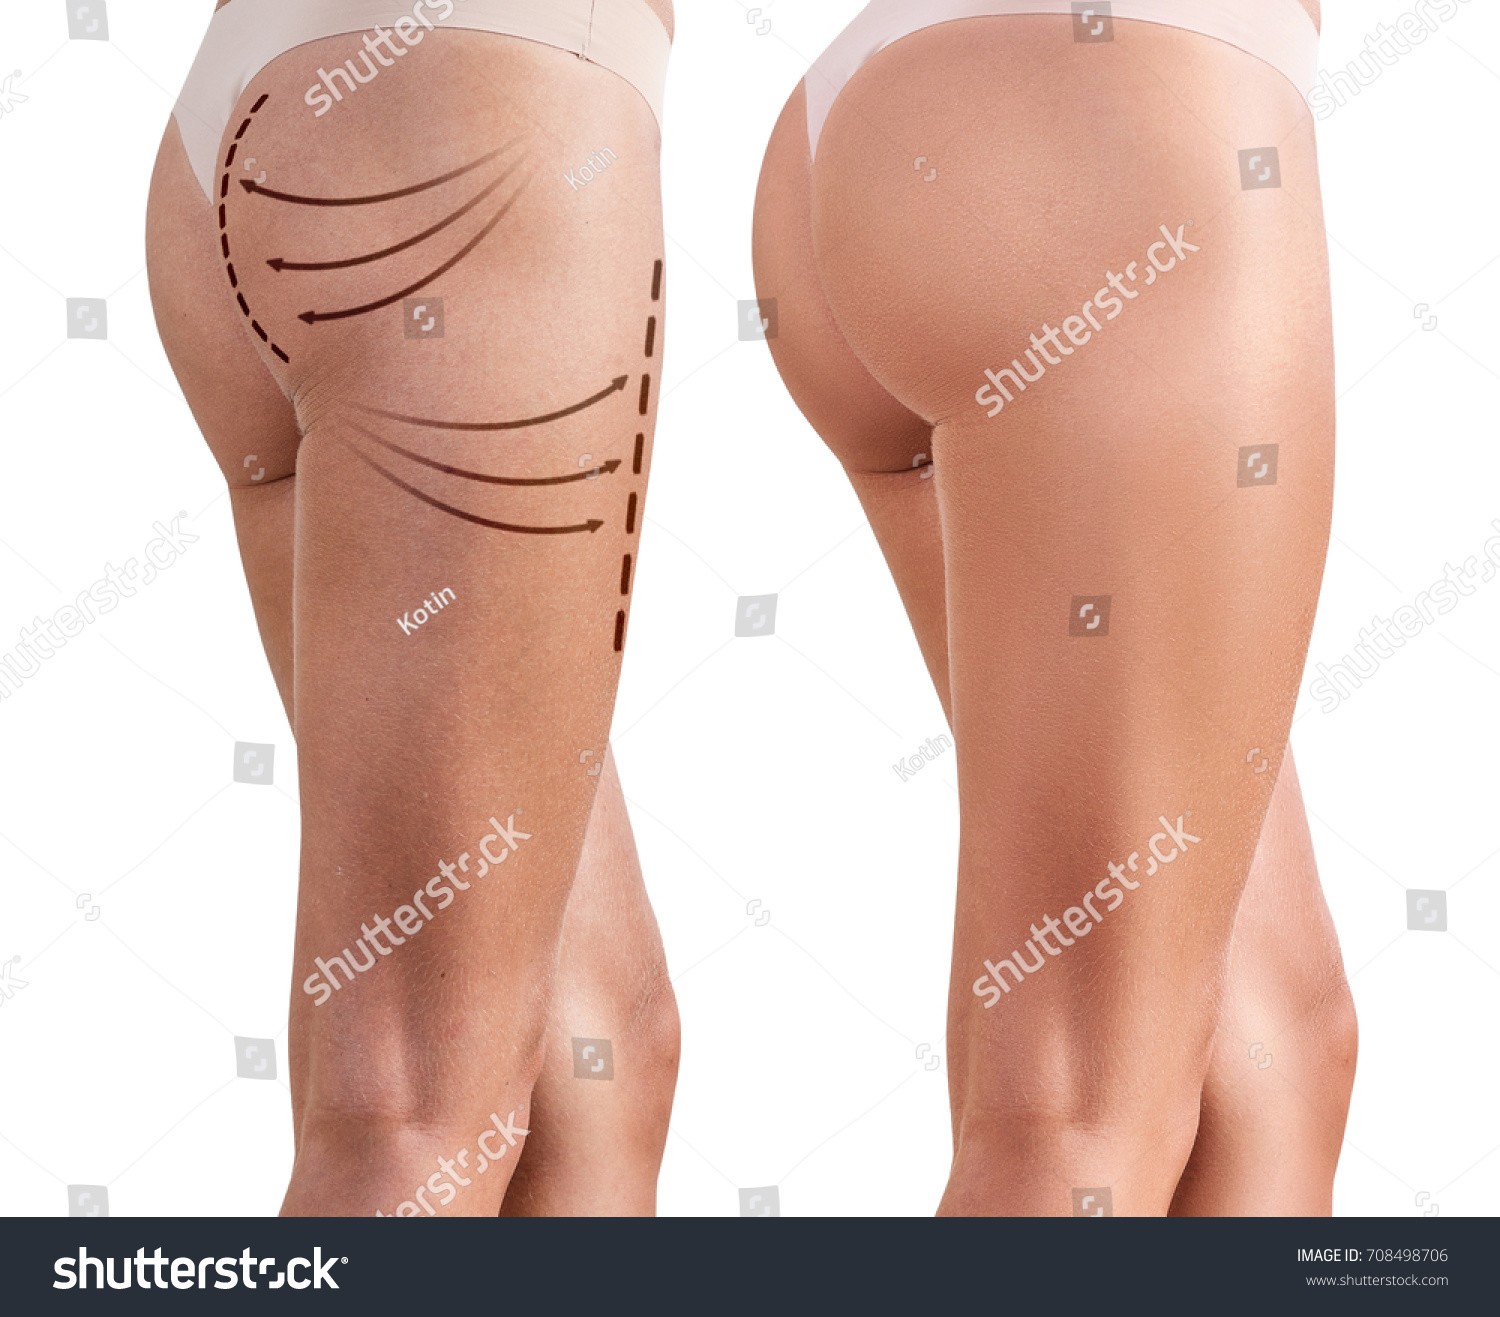 Woman's buttocks before and after plastic surgery #708498706